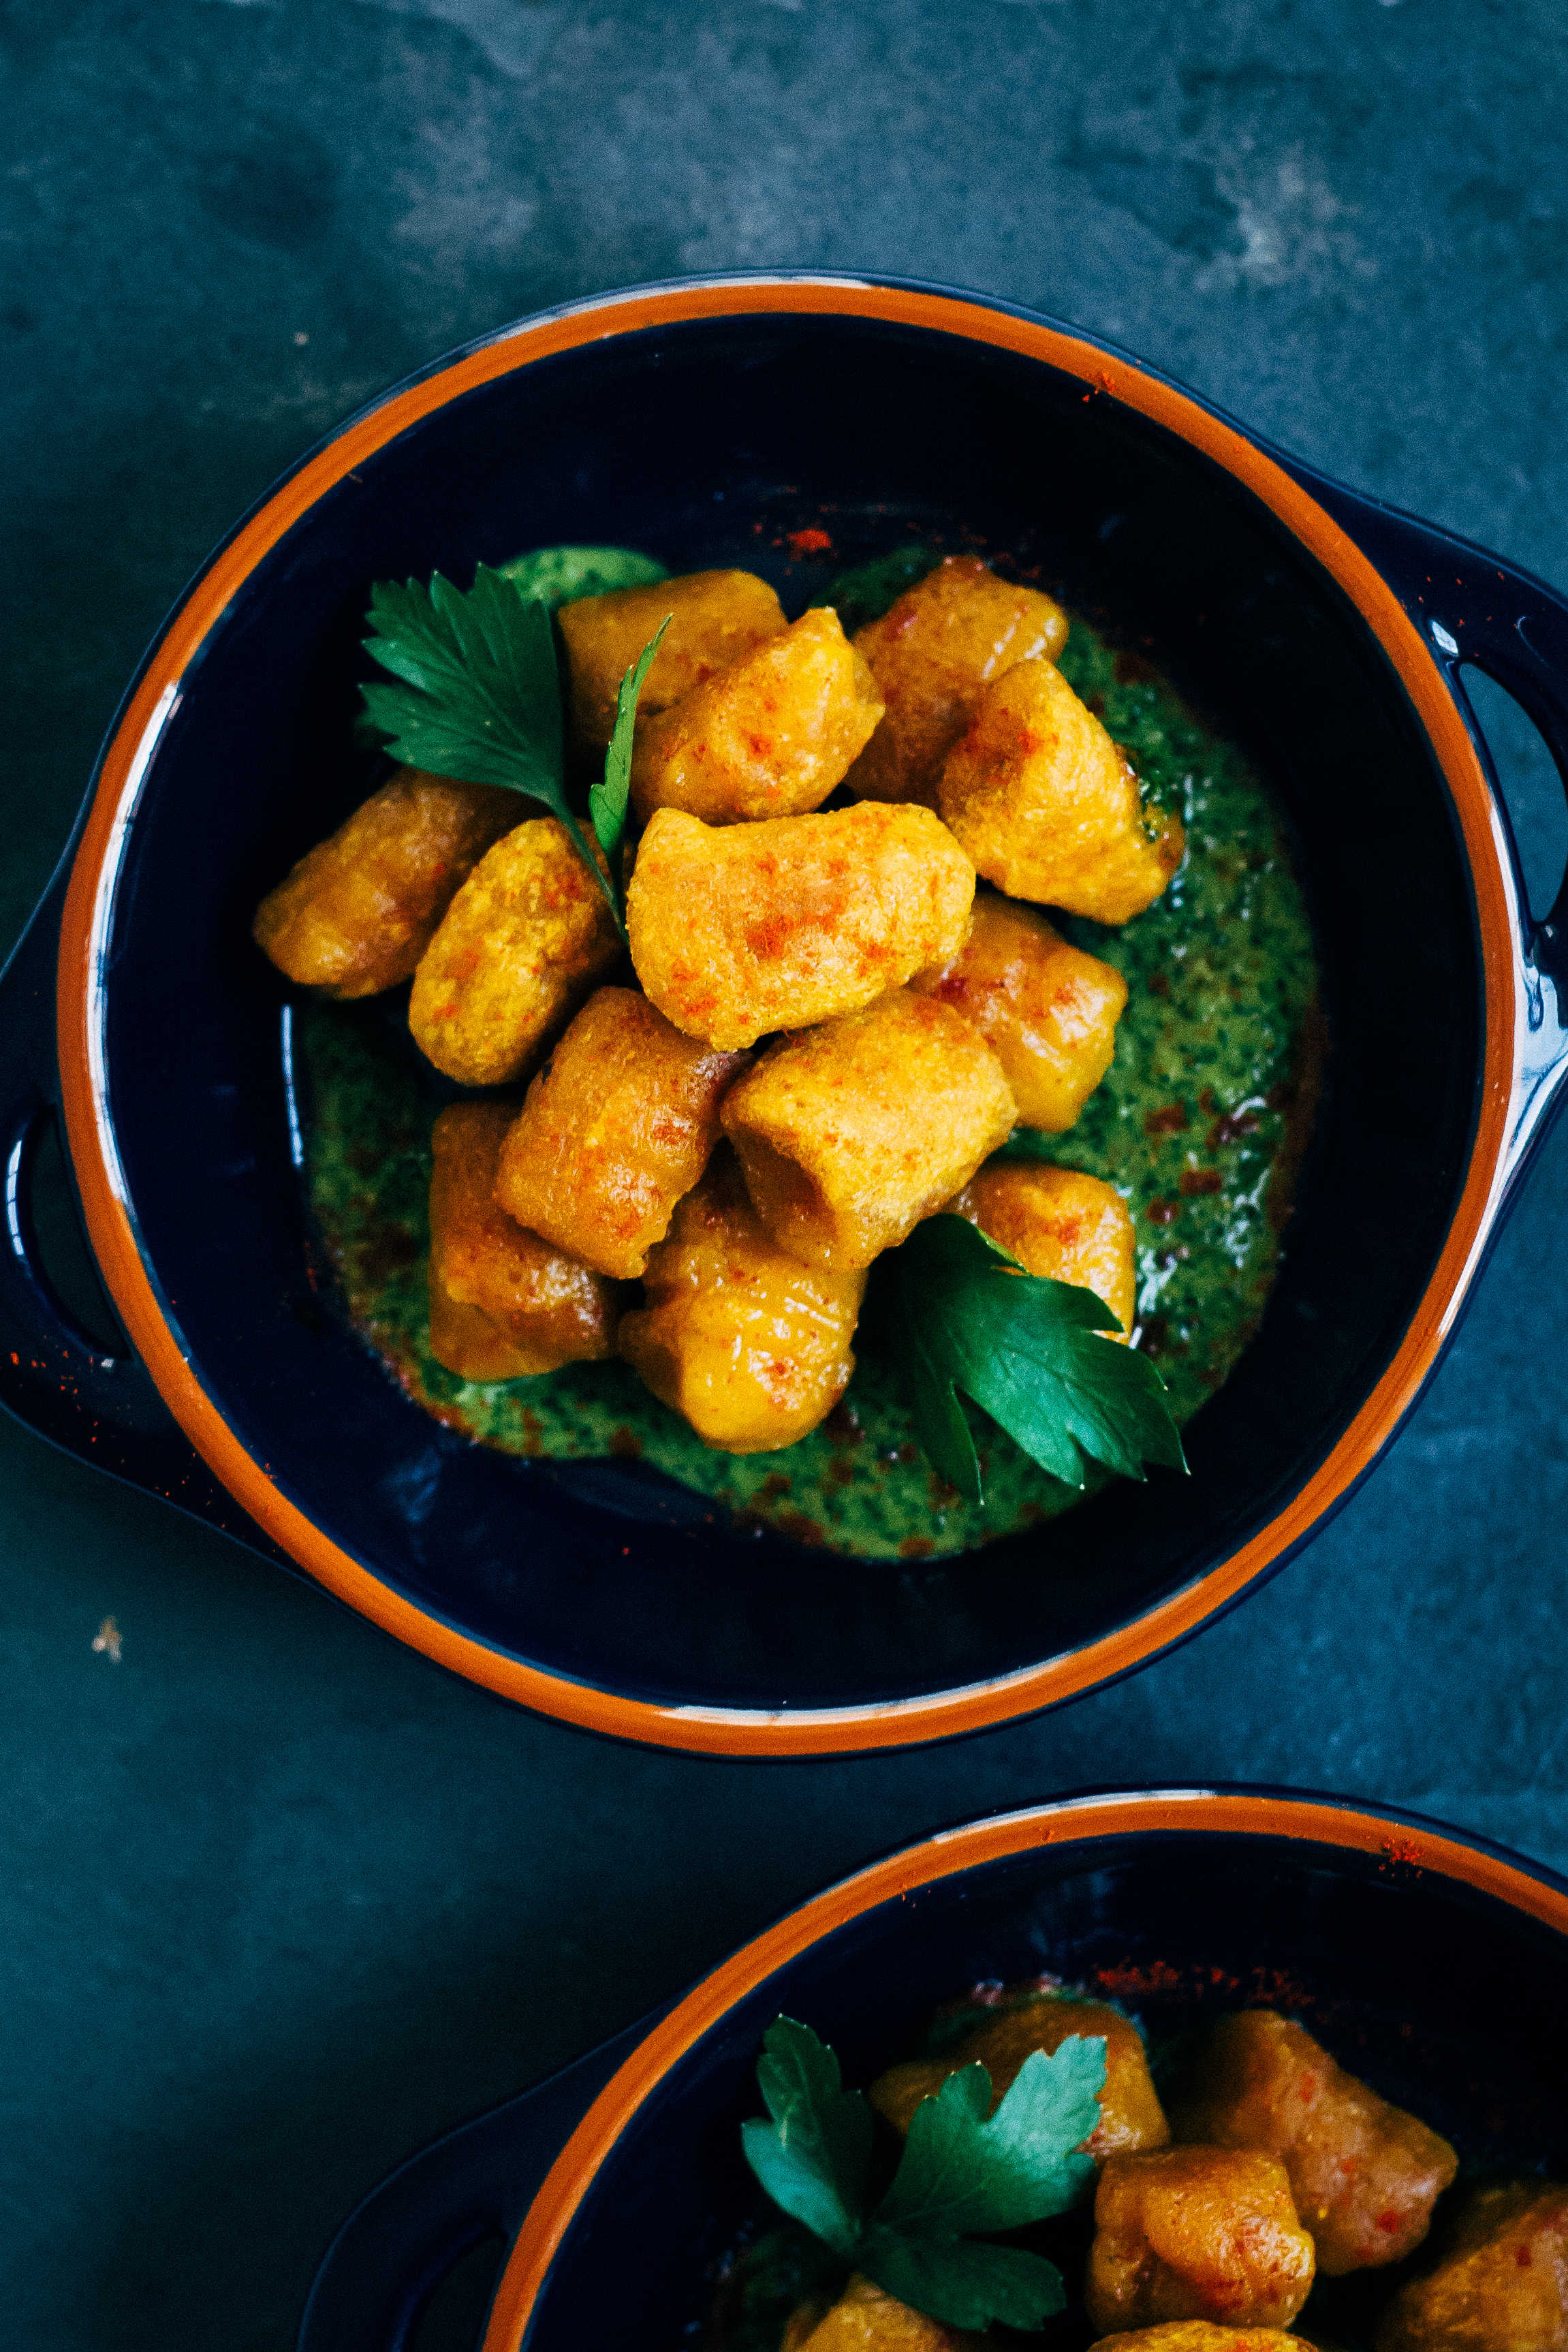 Harissa-Spiced Pumpkin Gnocchi w/ Parsley and Mint PestoHarissa-Spiced Pumpkin Gnocchi w/ Parsley and Mint Pesto | Well and Full